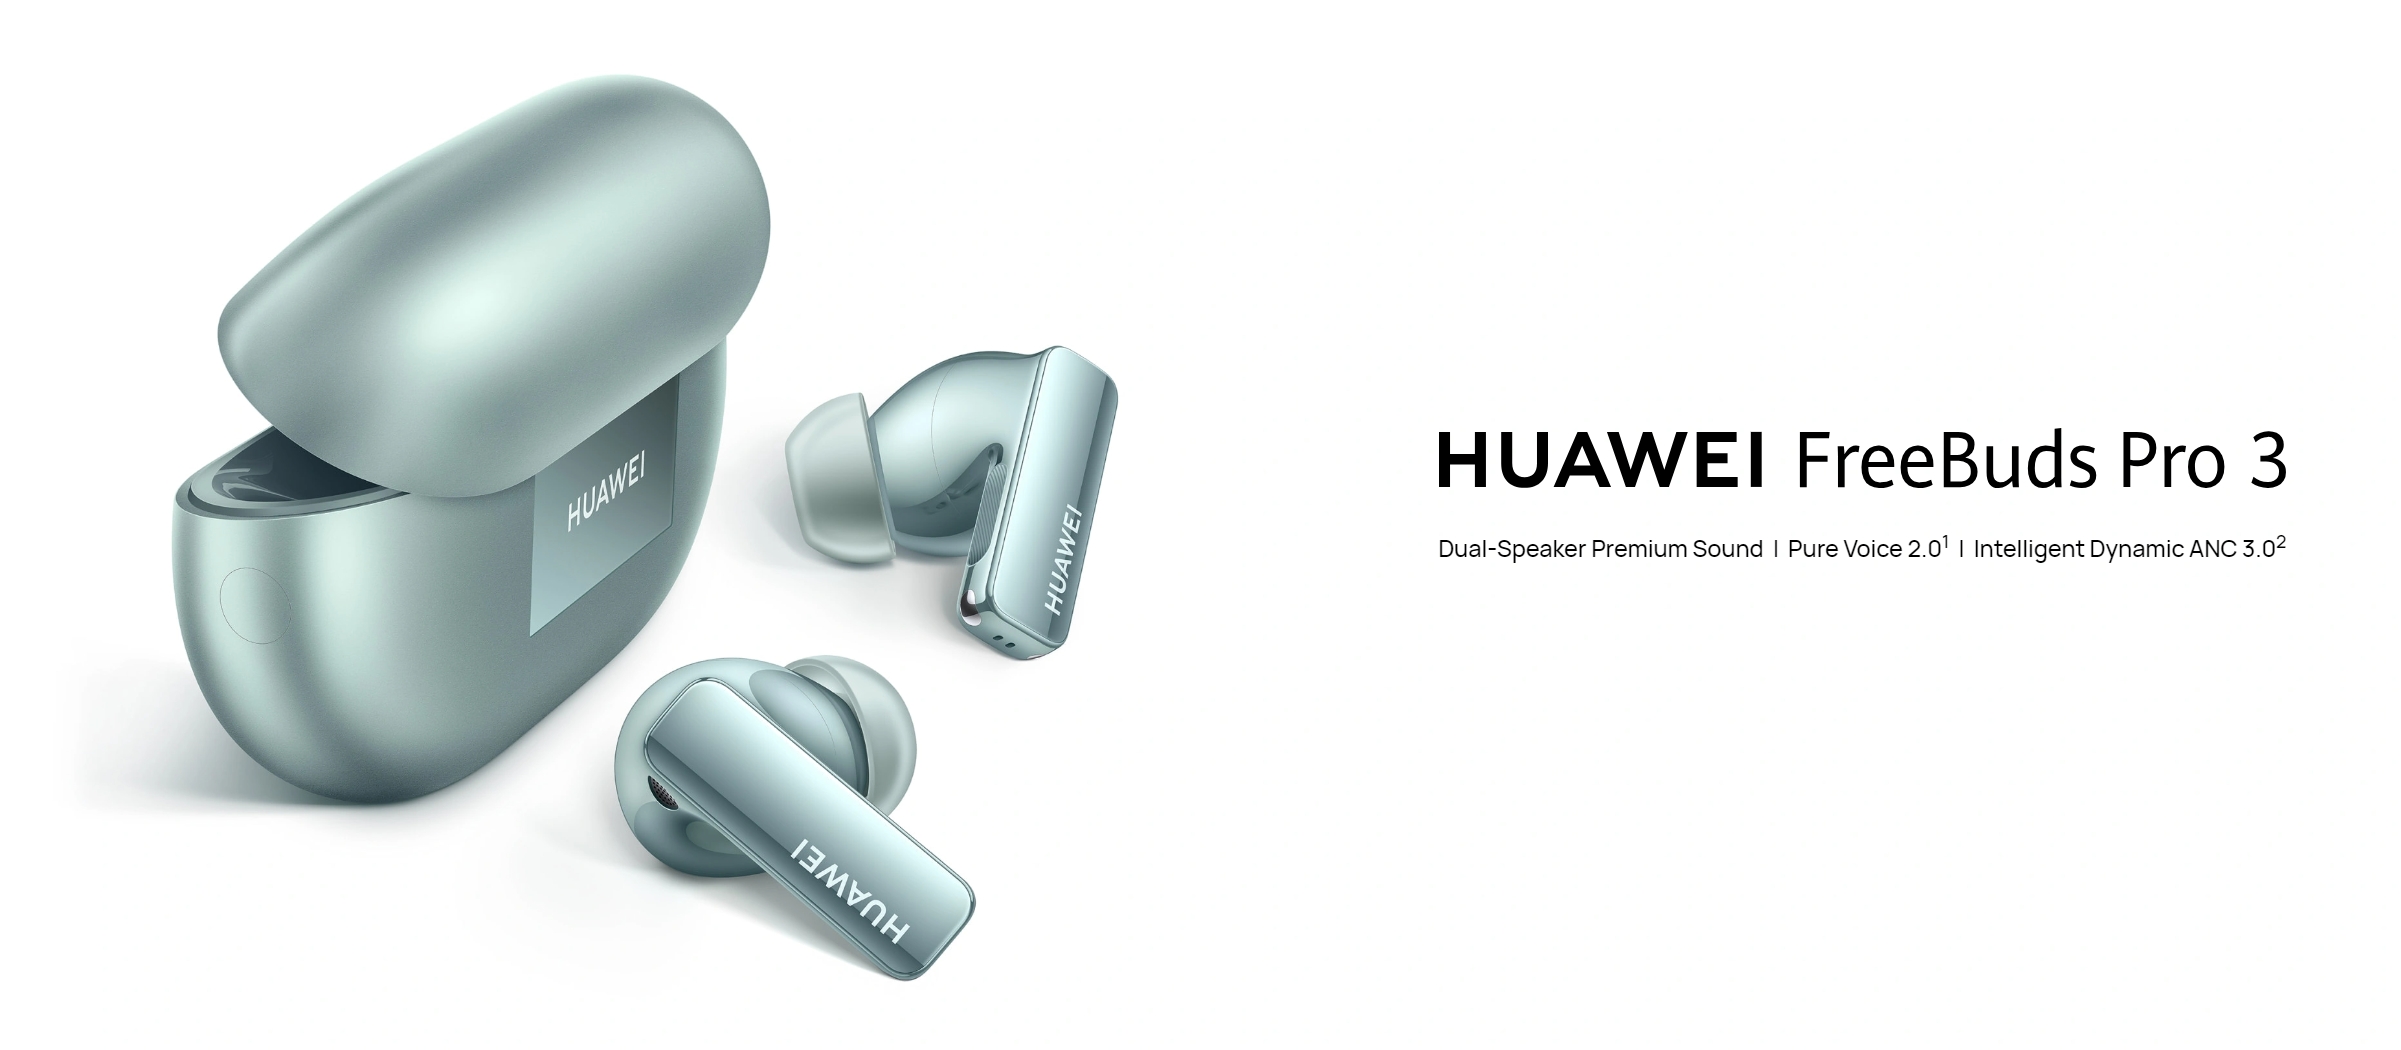 HUAWEI FreeBuds Pro 3 – Dual Speaker Premium Sound, Noise Cancellation for  Calls - Up to 31-Hour Battery Life with Charging Case - Bluetooth Earbuds –